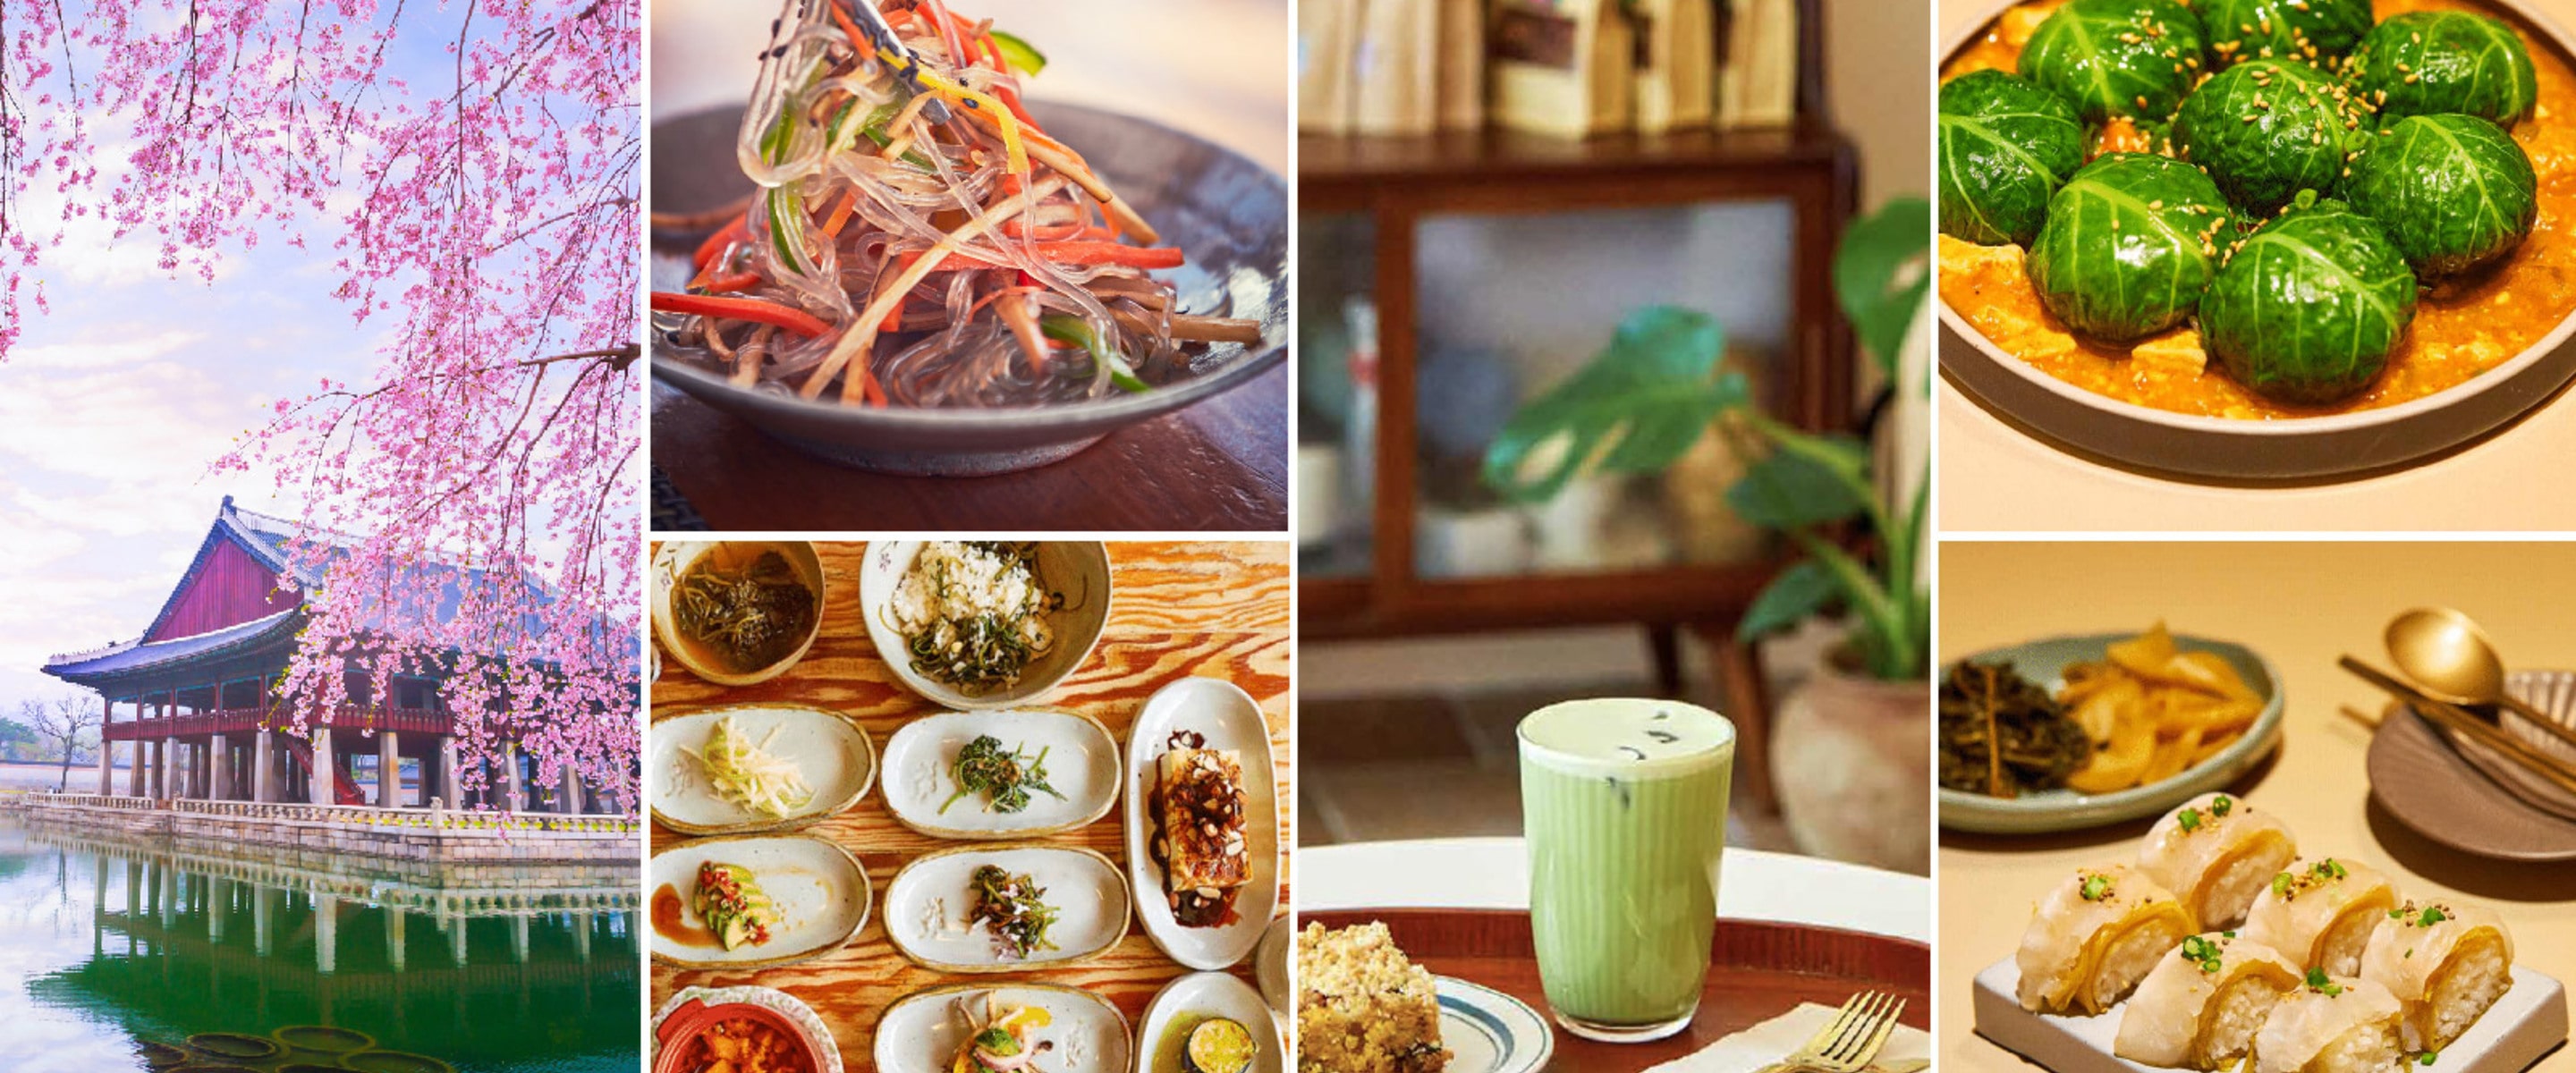 From Street Food to Restaurants: Why South Korea May be the Next Vegan Hotspot